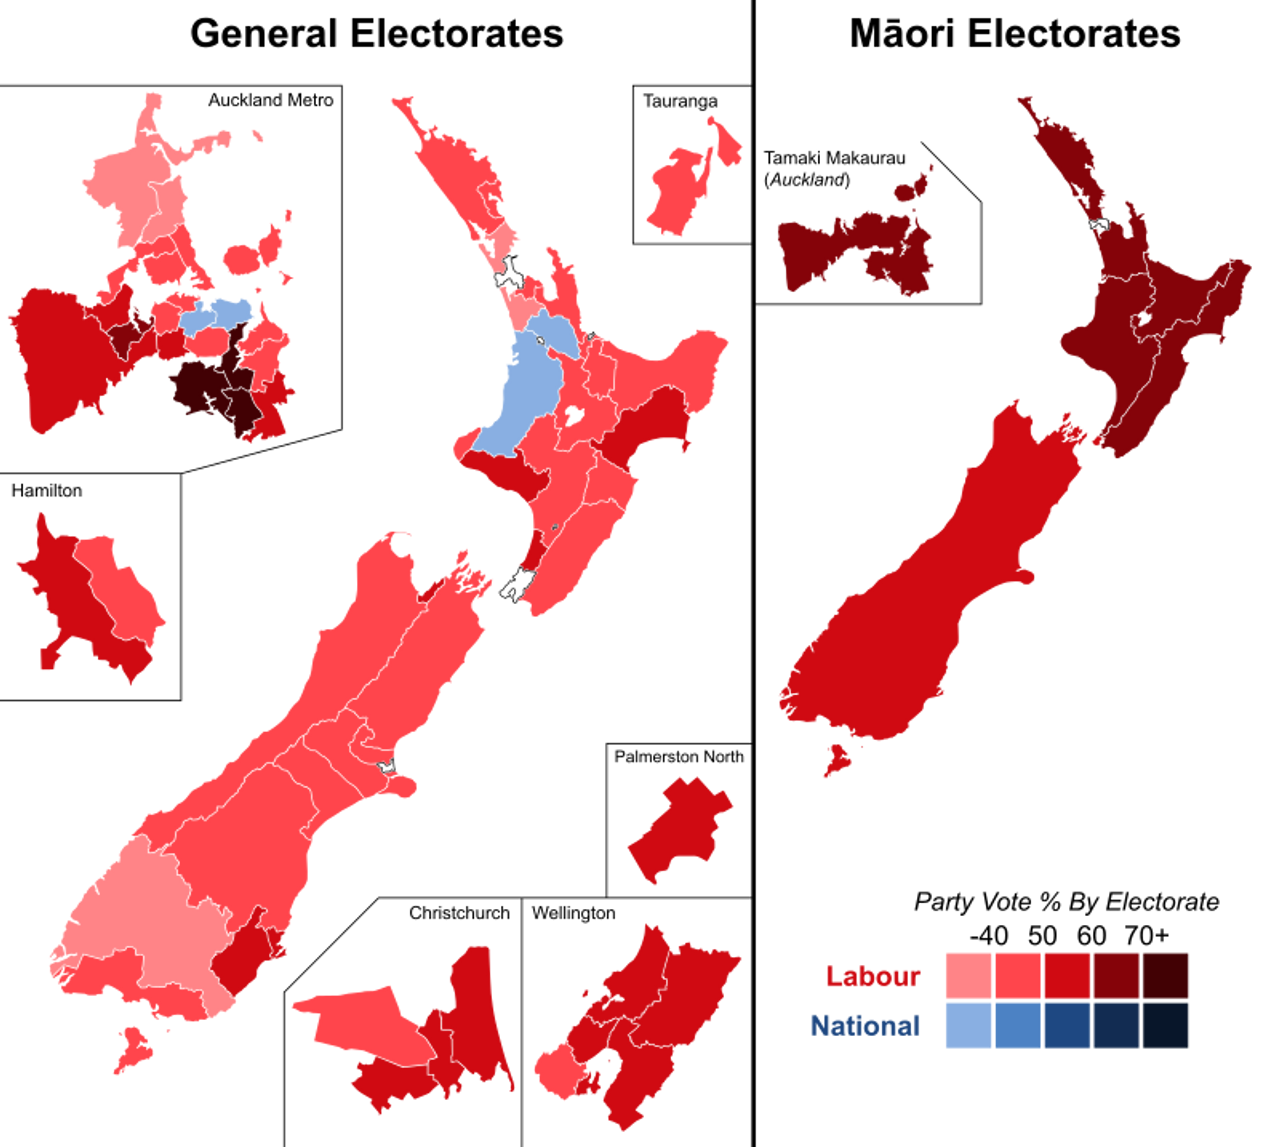 Wealthy Areas Switched Support To Labour Party In New Zealand Election World Socialist Web Site